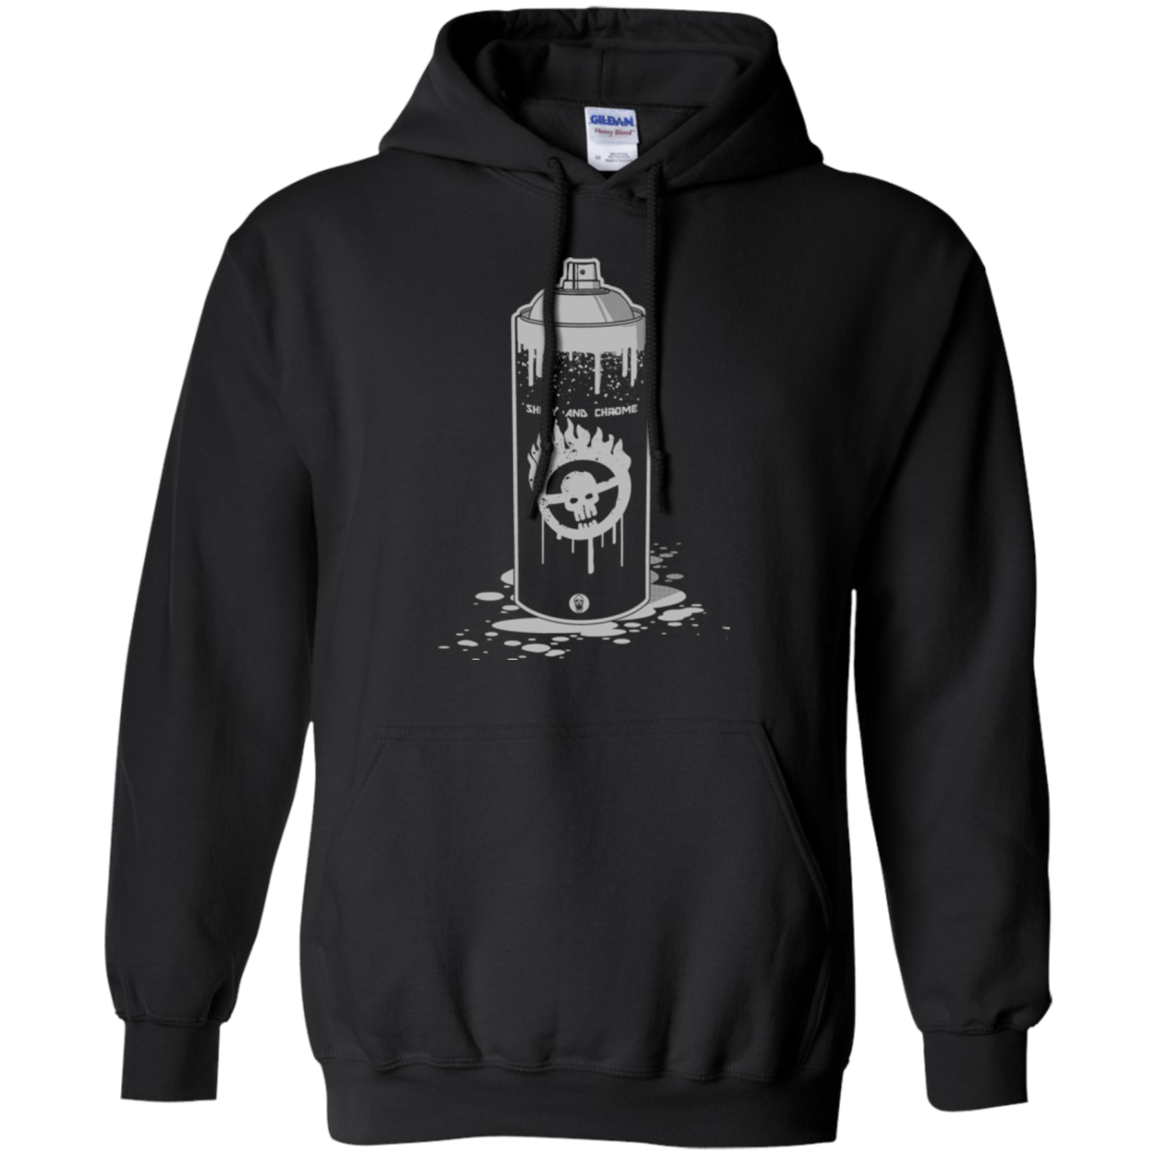 Sweatshirts Black / Small What As Pray What A Lovely Spray Pullover Hoodie